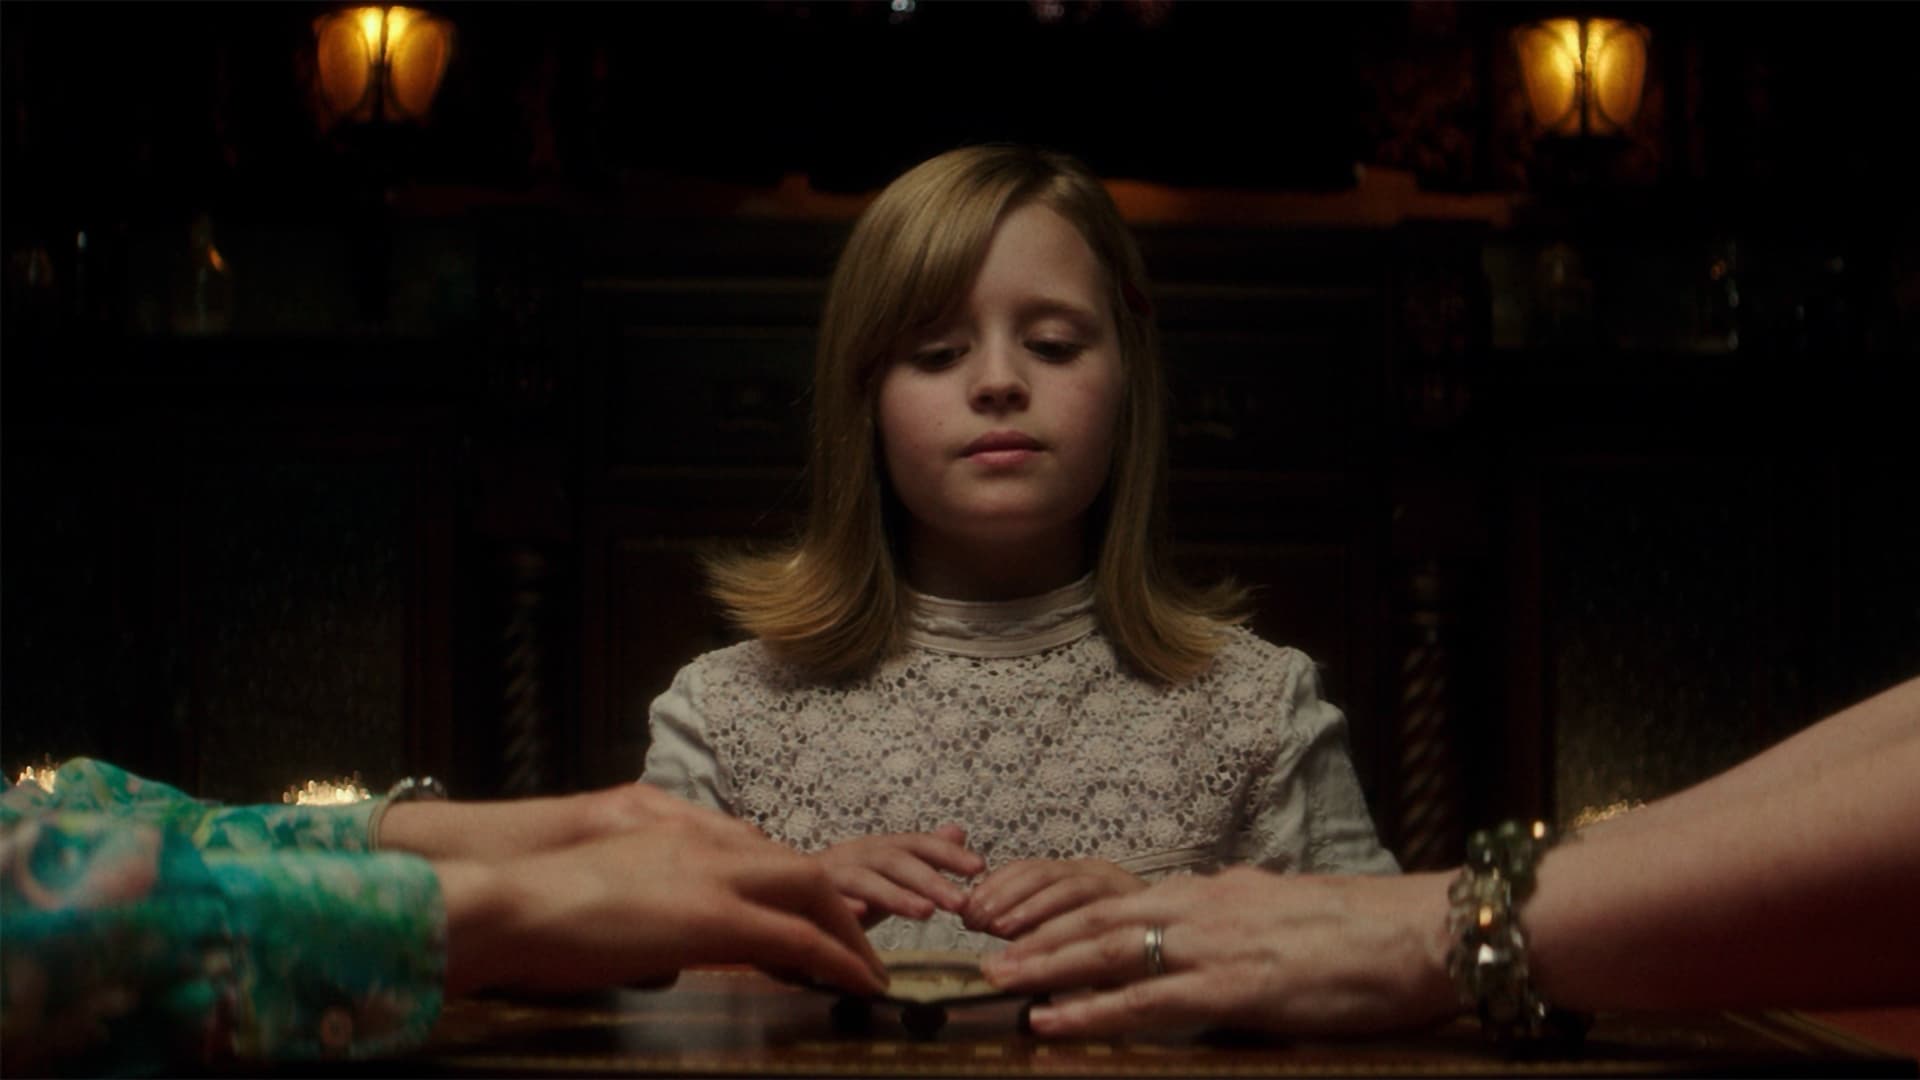 Screenshot from the film Ouija: Origin of Evil. A young girl in a white dress places her hand on a planchet along with two other hands.